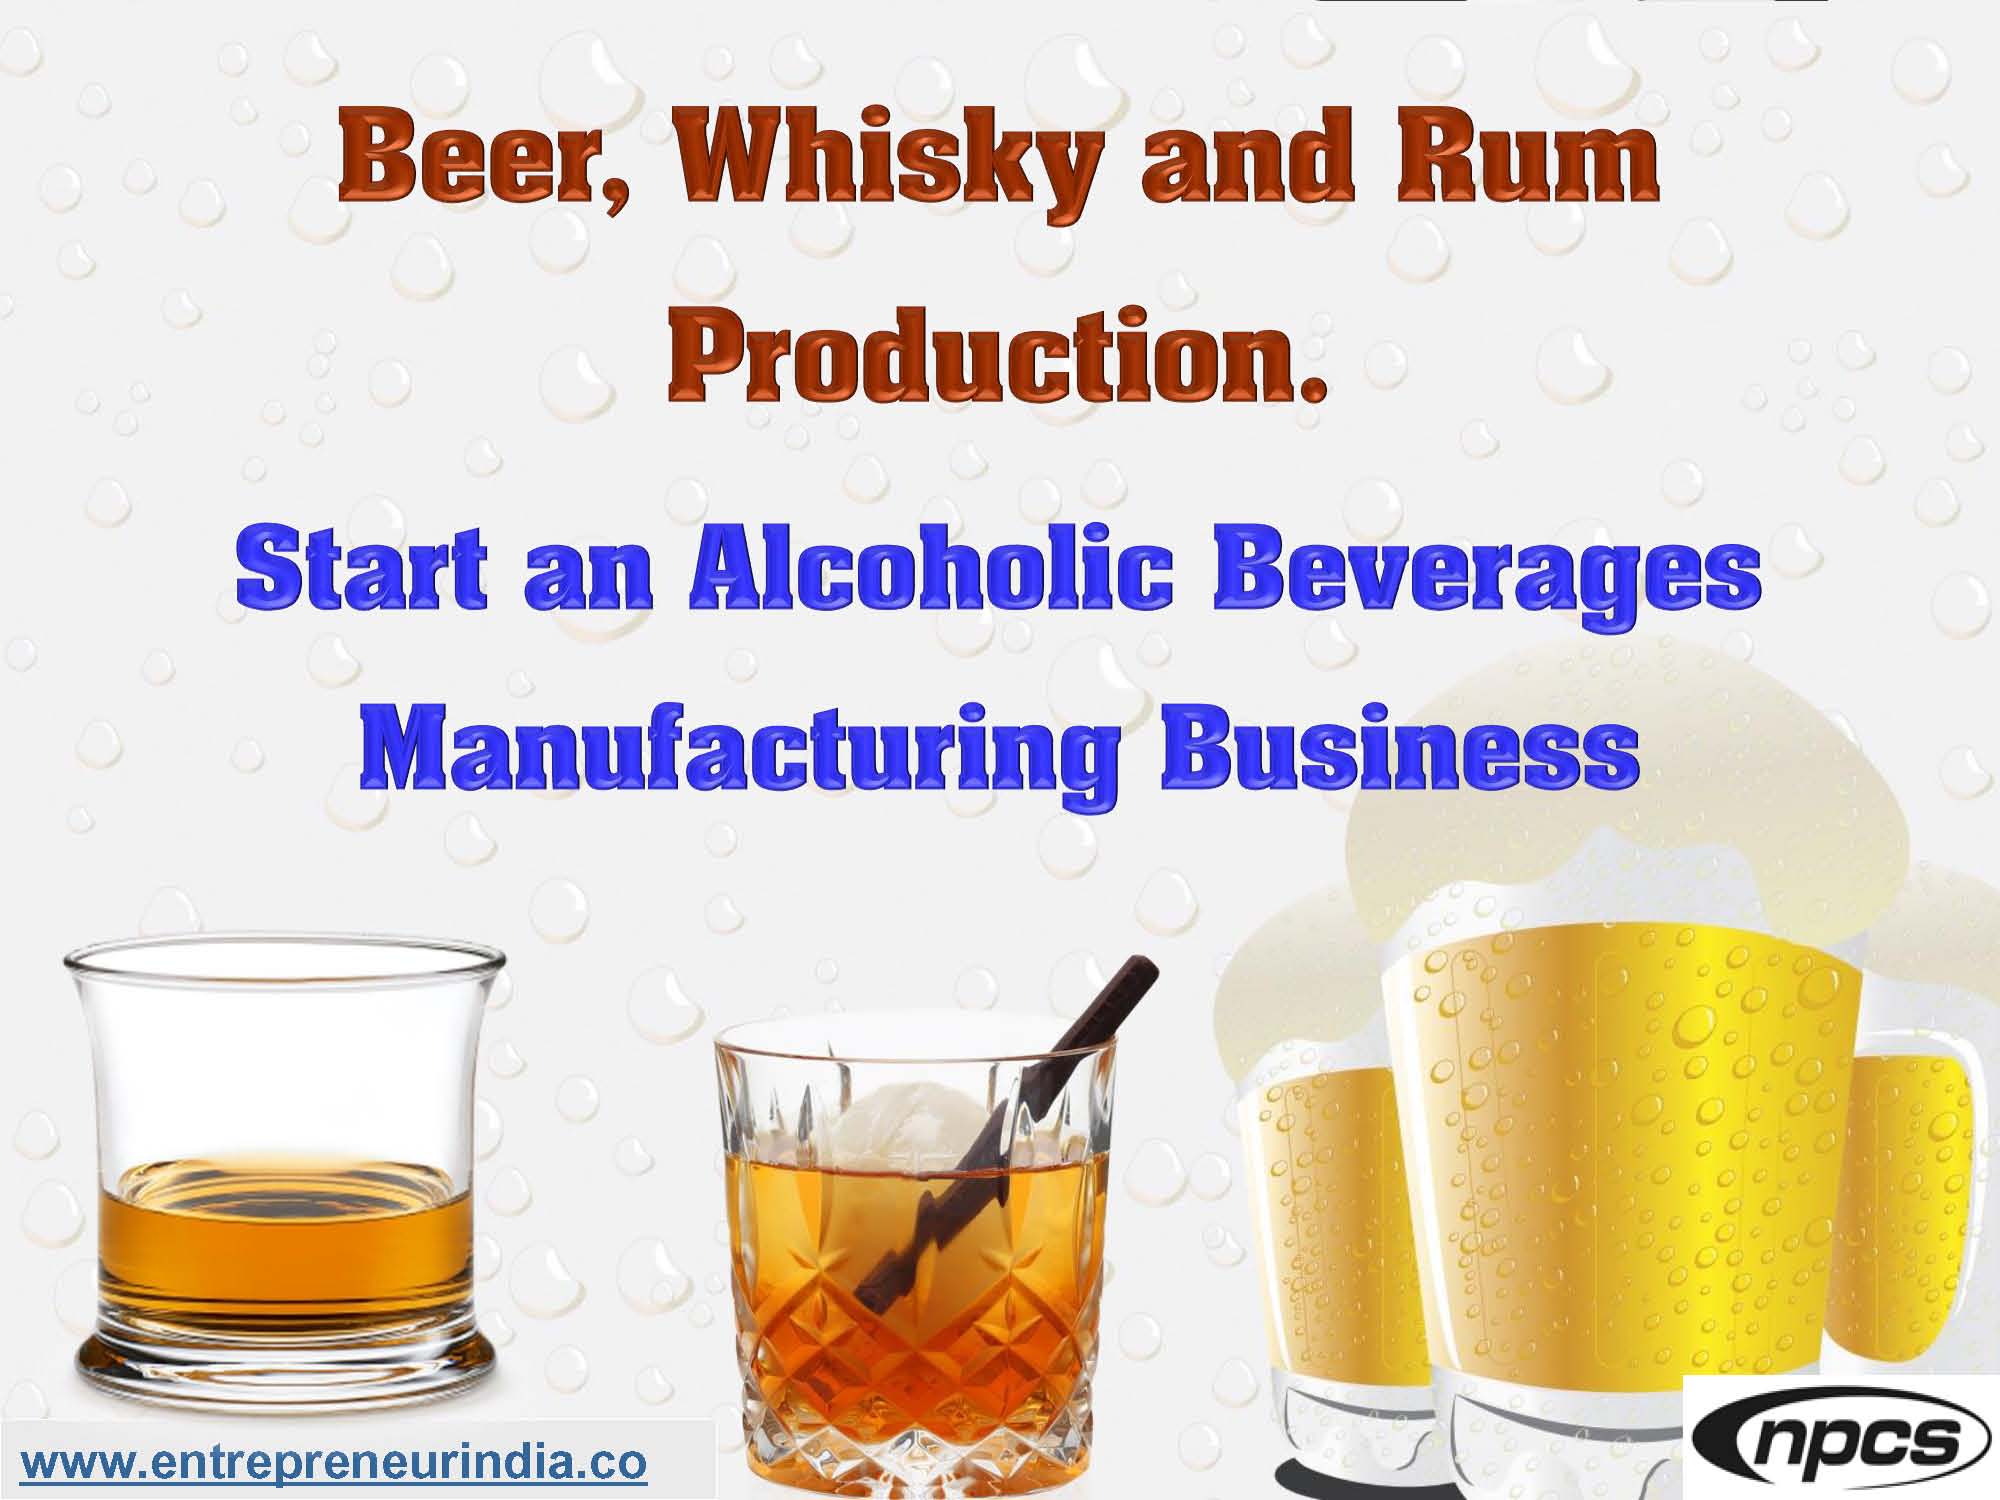 Beer, Whisky and Rum Production